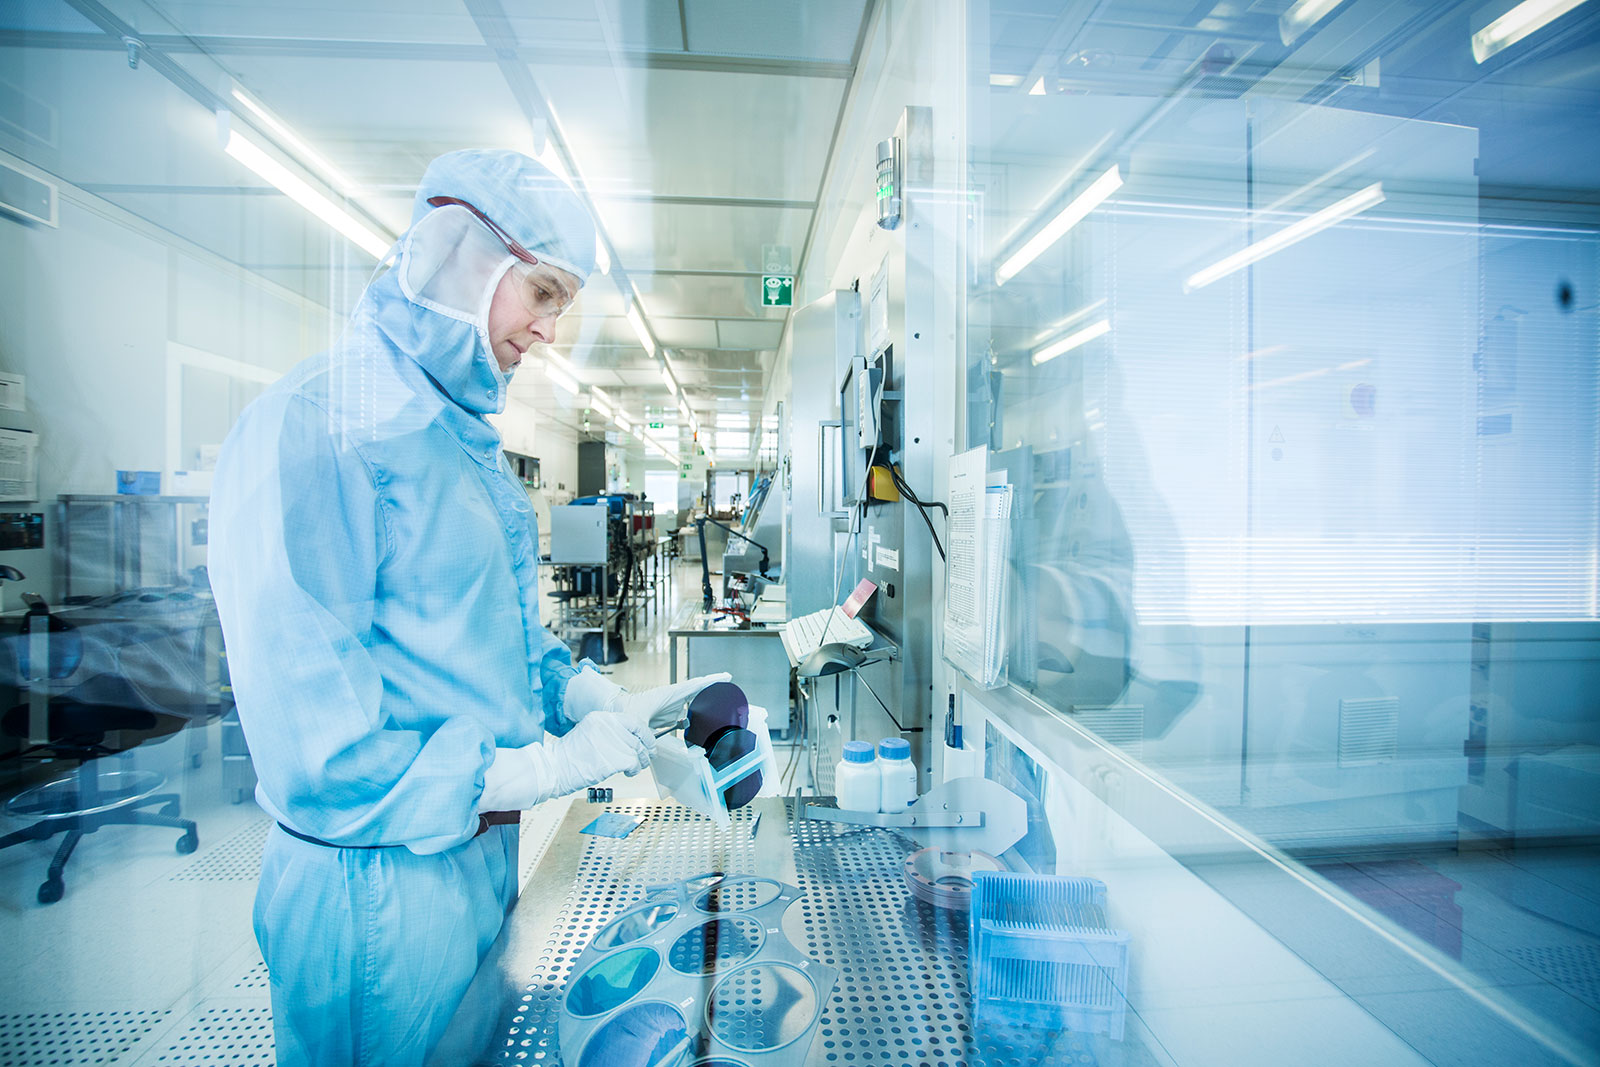 A person with protective clothing in a cleanroom preparing sensor wafers.